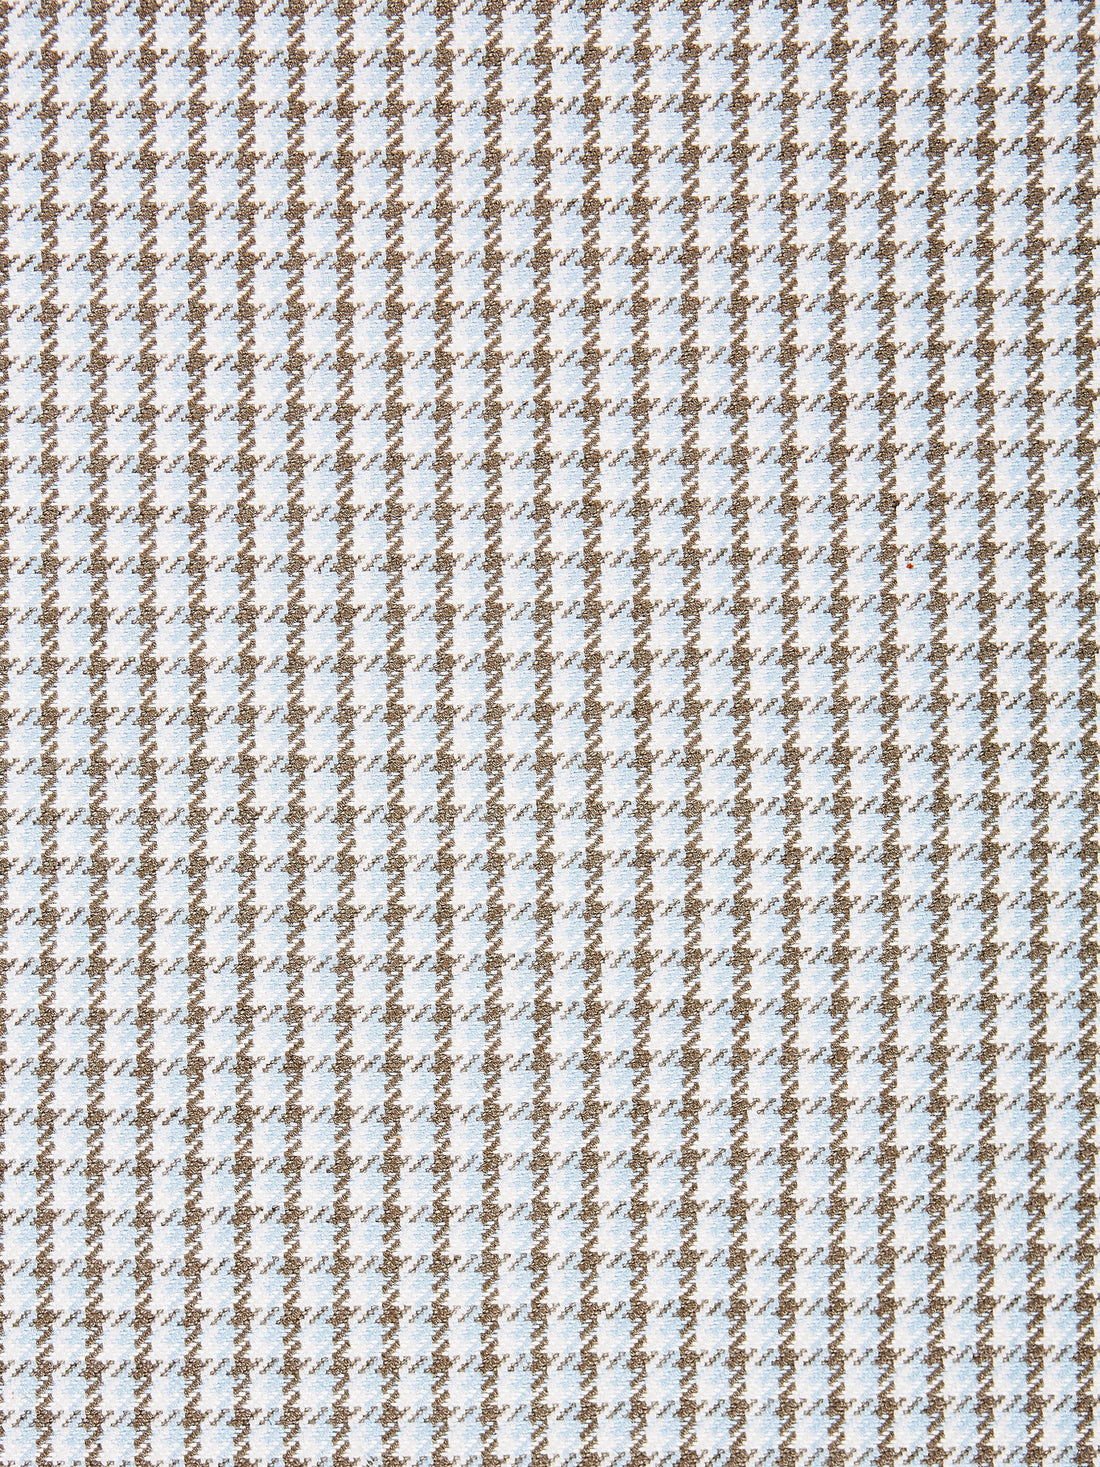 Tattersall Check fabric in sky color - pattern number SC 000127013 - by Scalamandre in the Scalamandre Fabrics Book 1 collection